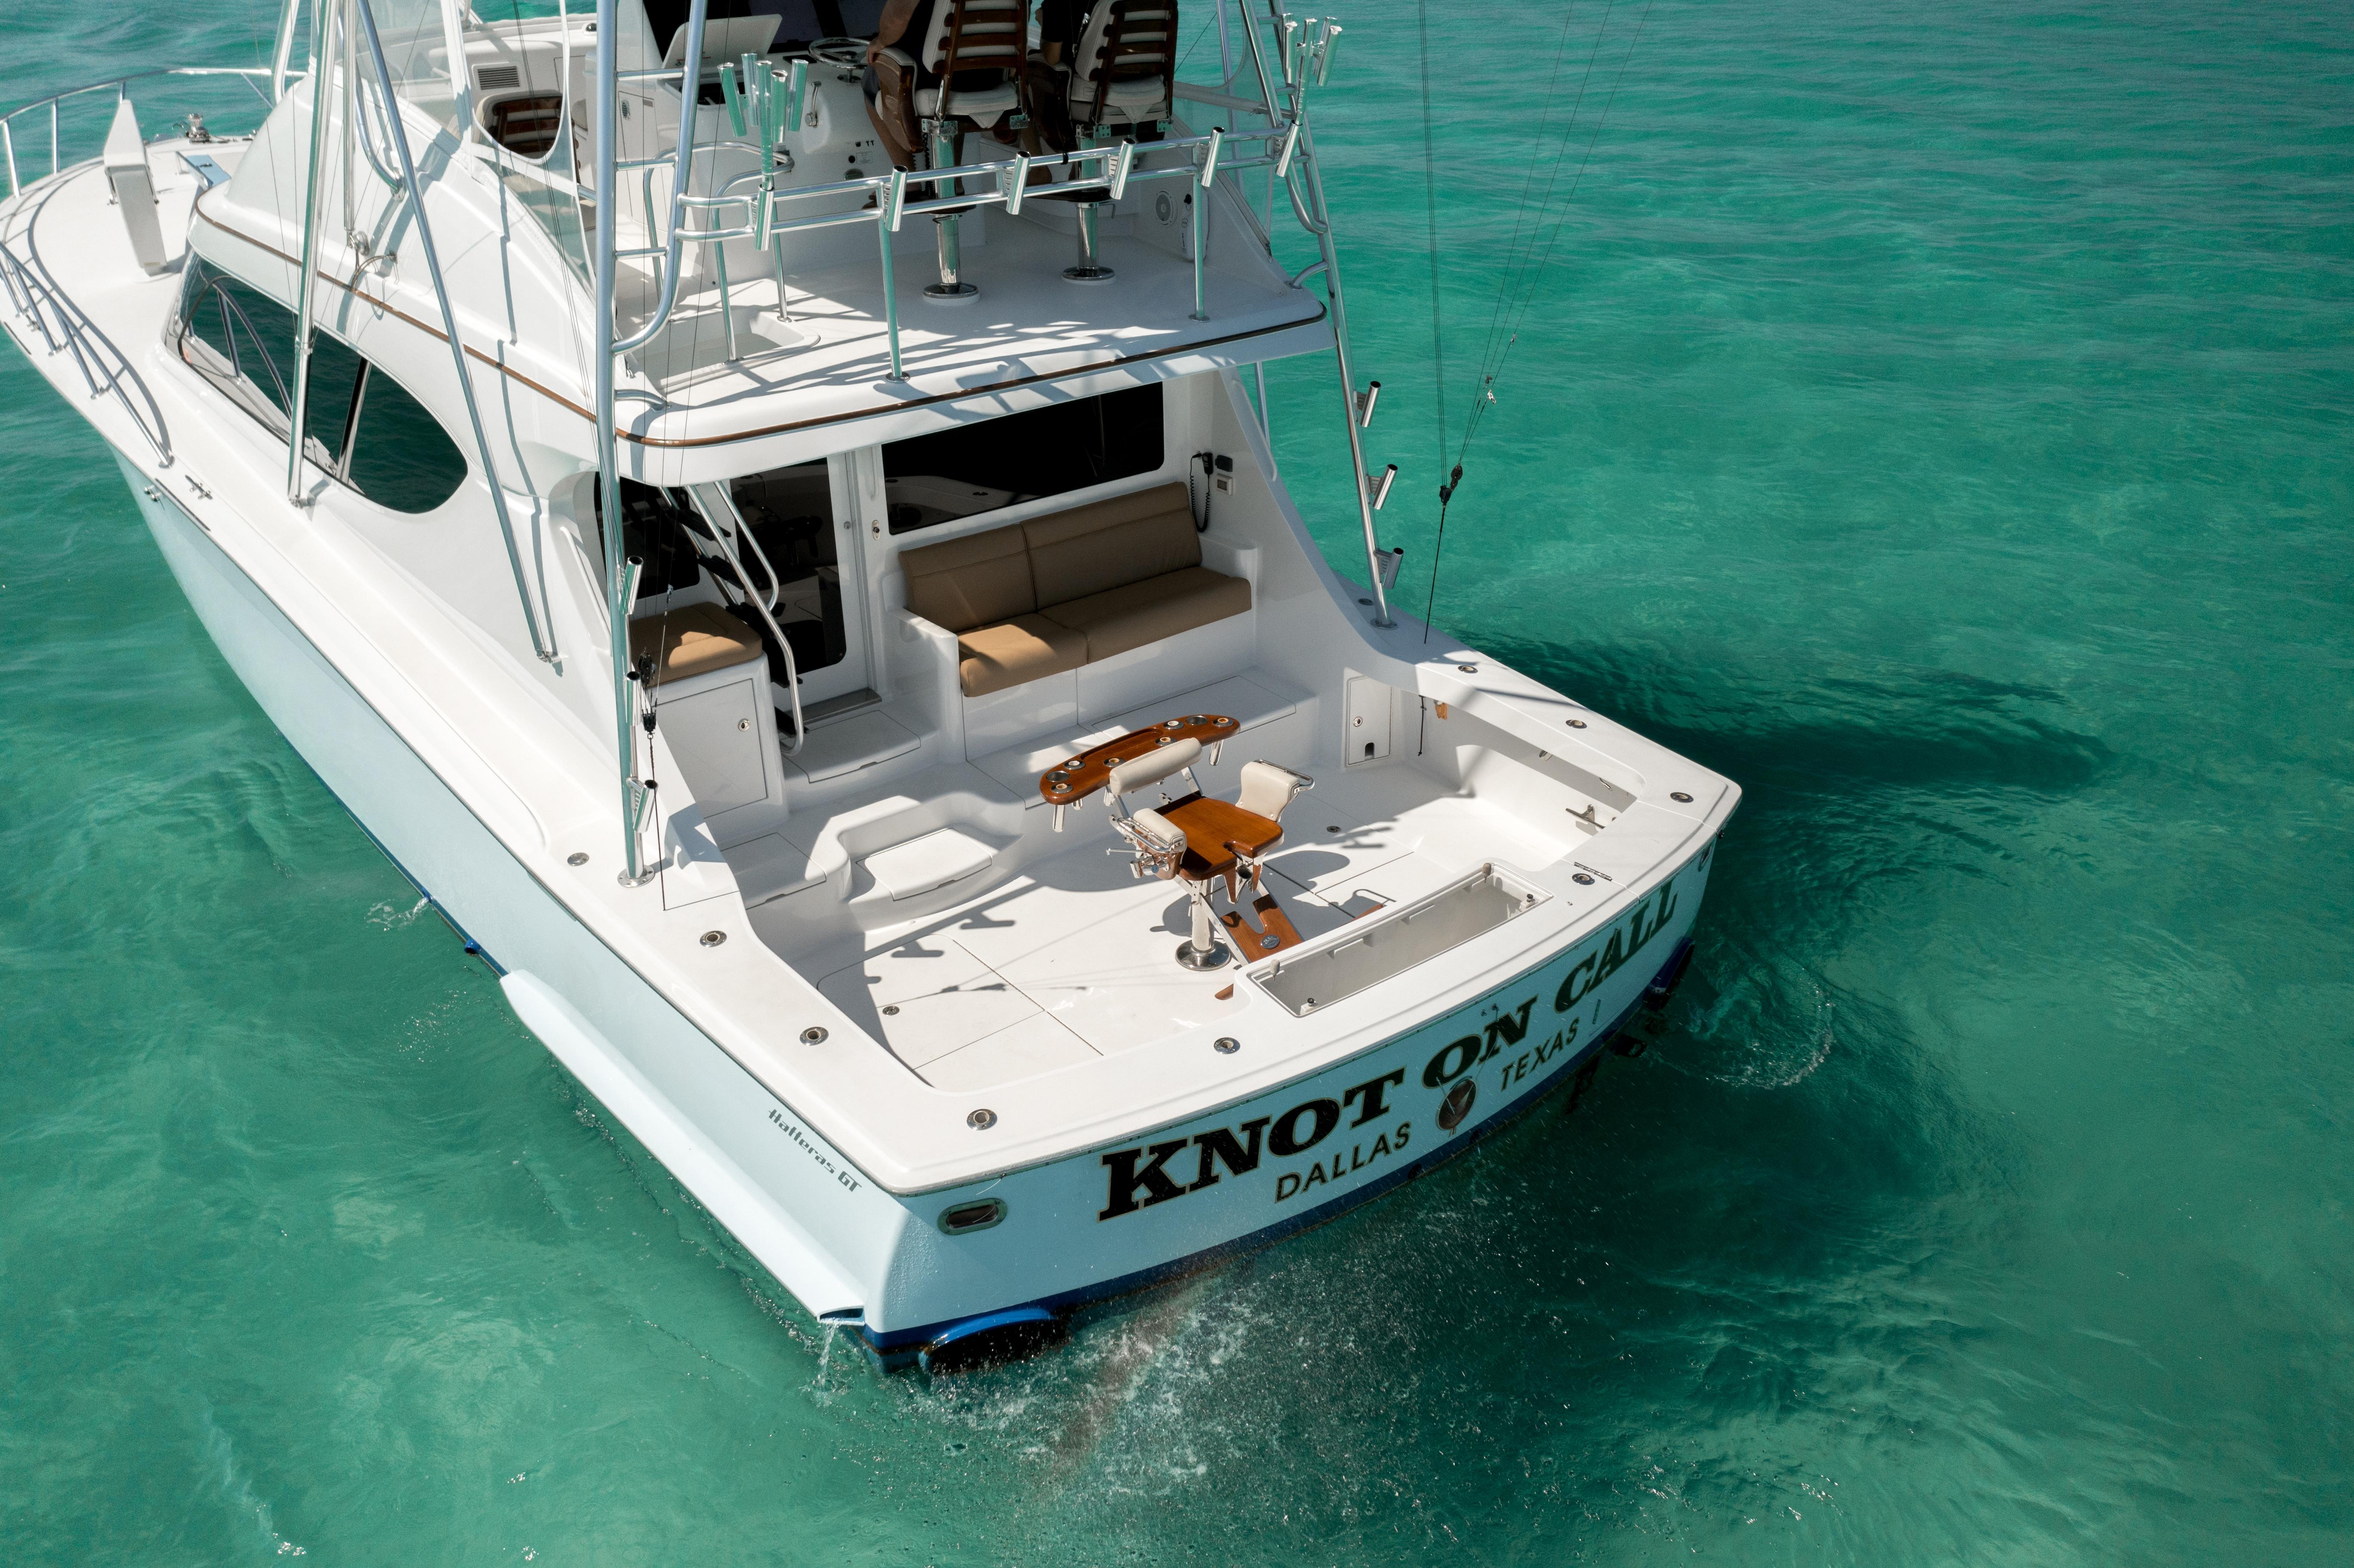 2016 Hatteras GT60  KNOT ON CALL  Transom